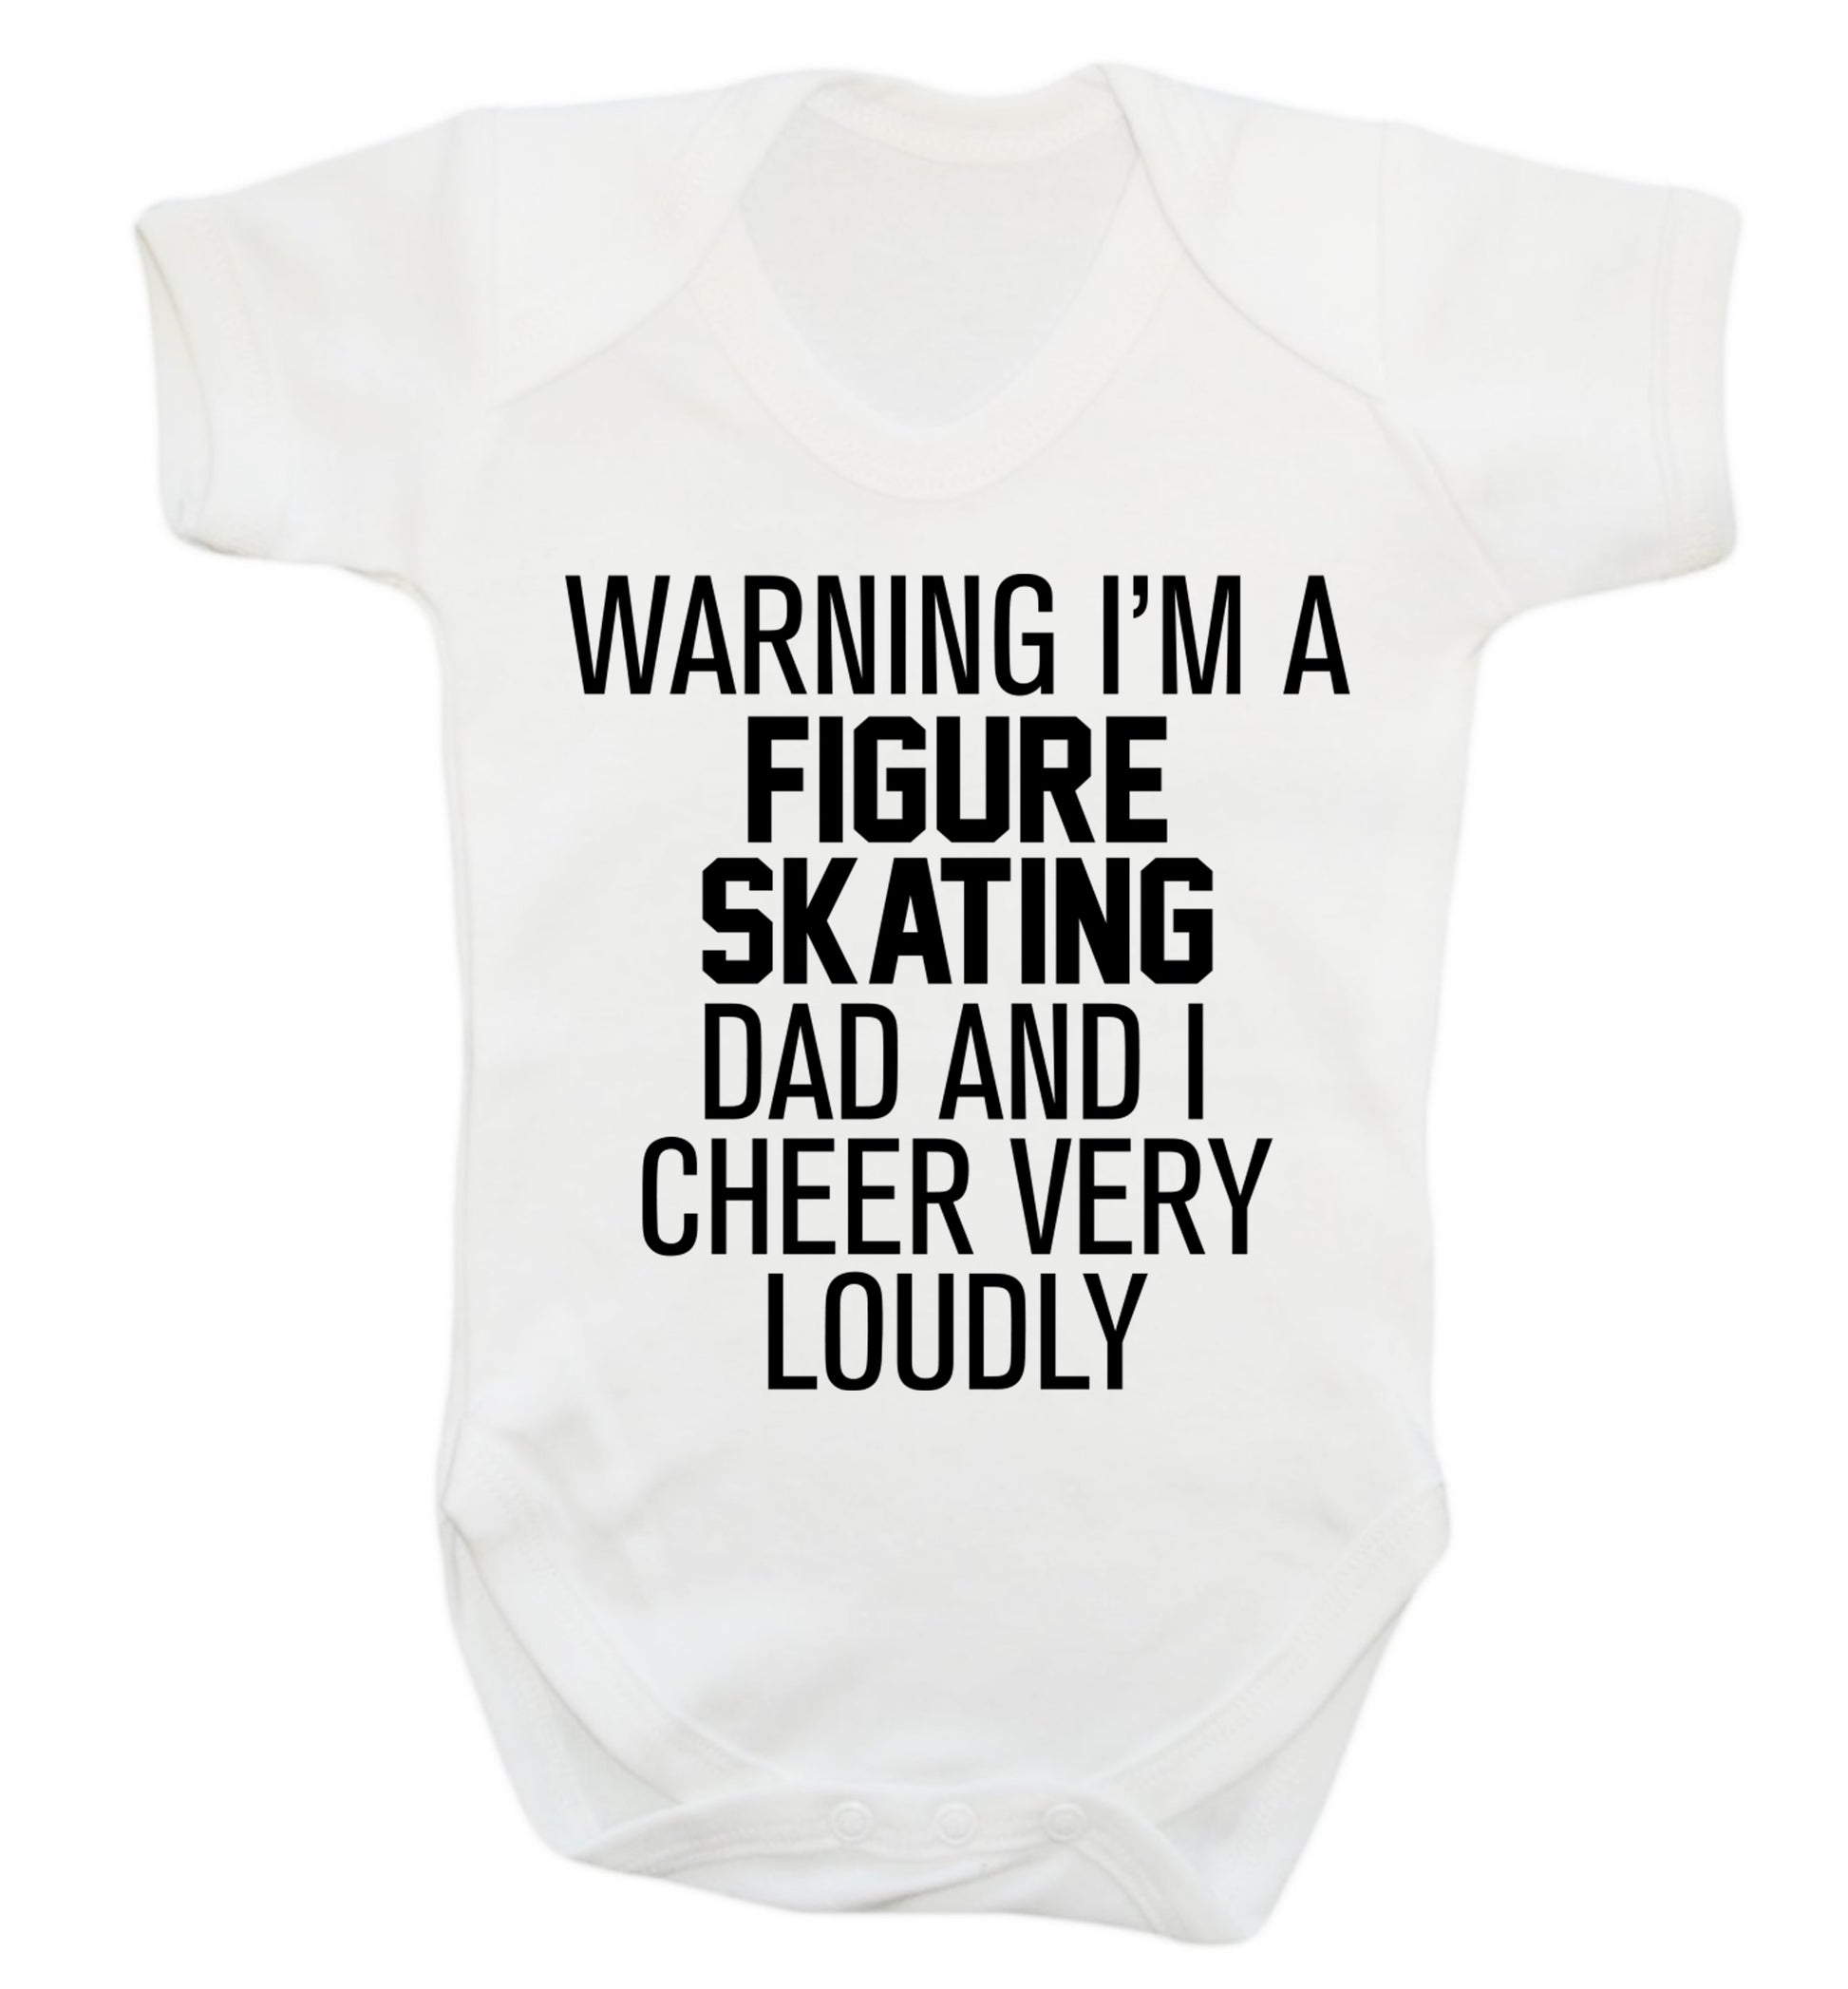 Warning I'm a figure skating dad and I cheer very loudly Baby Vest white 18-24 months